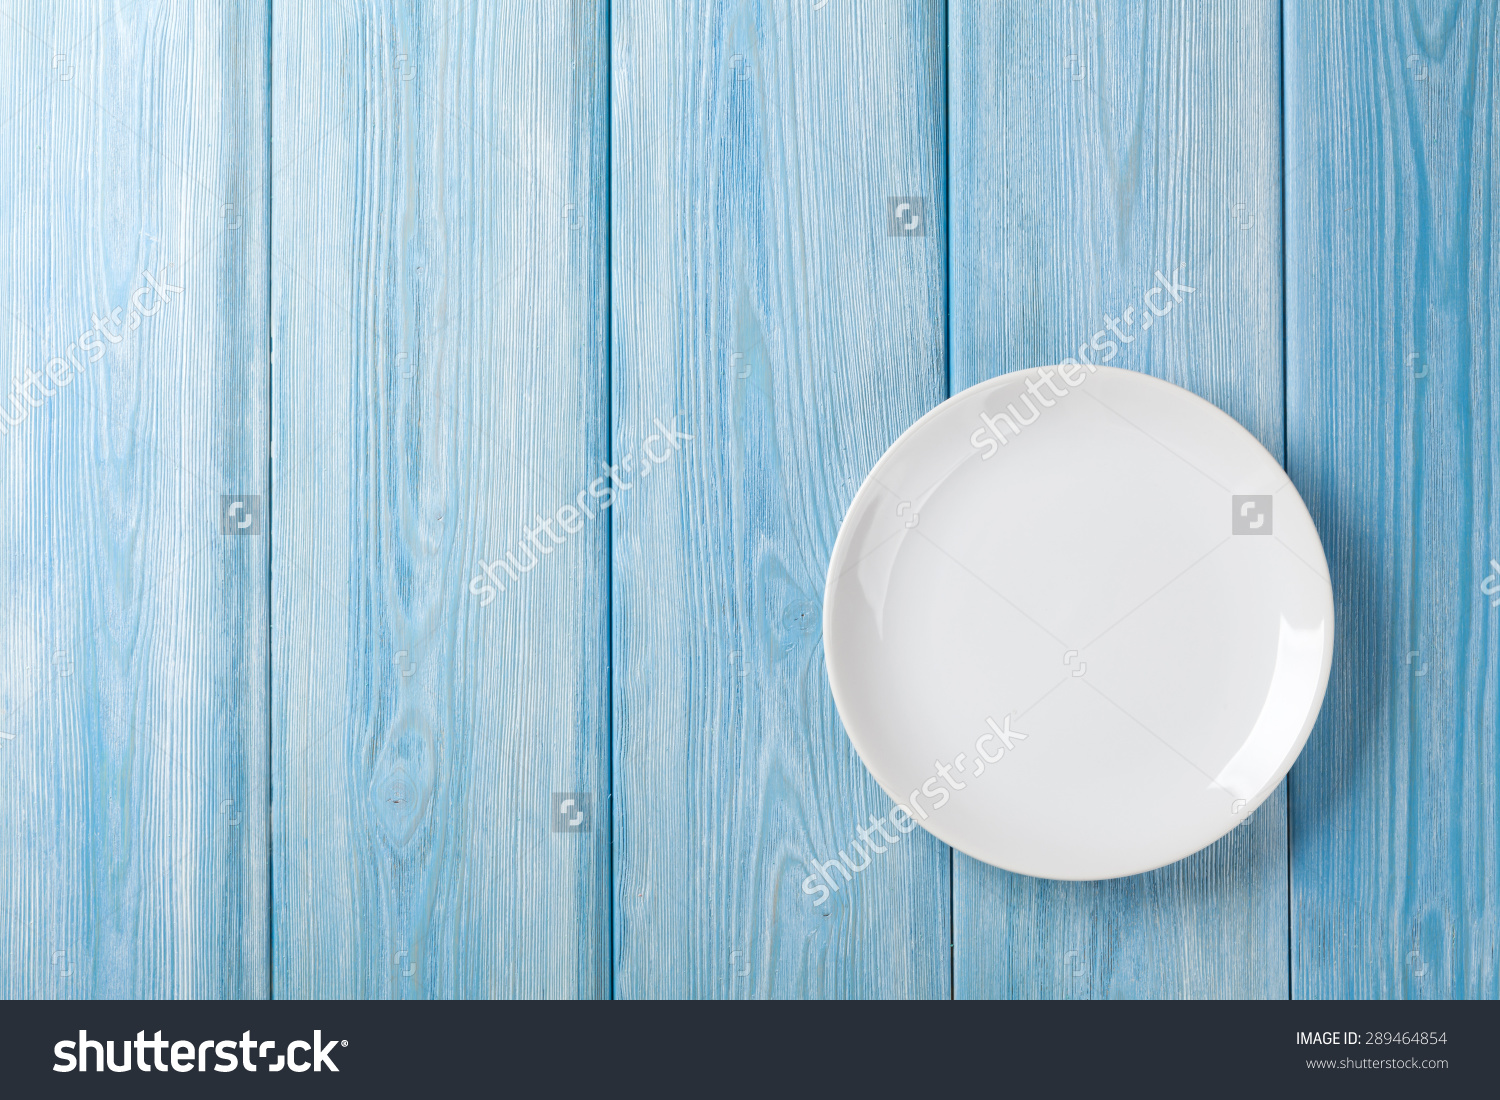 Empty Plate On Blue Wooden Background Top With Copy Space Stock